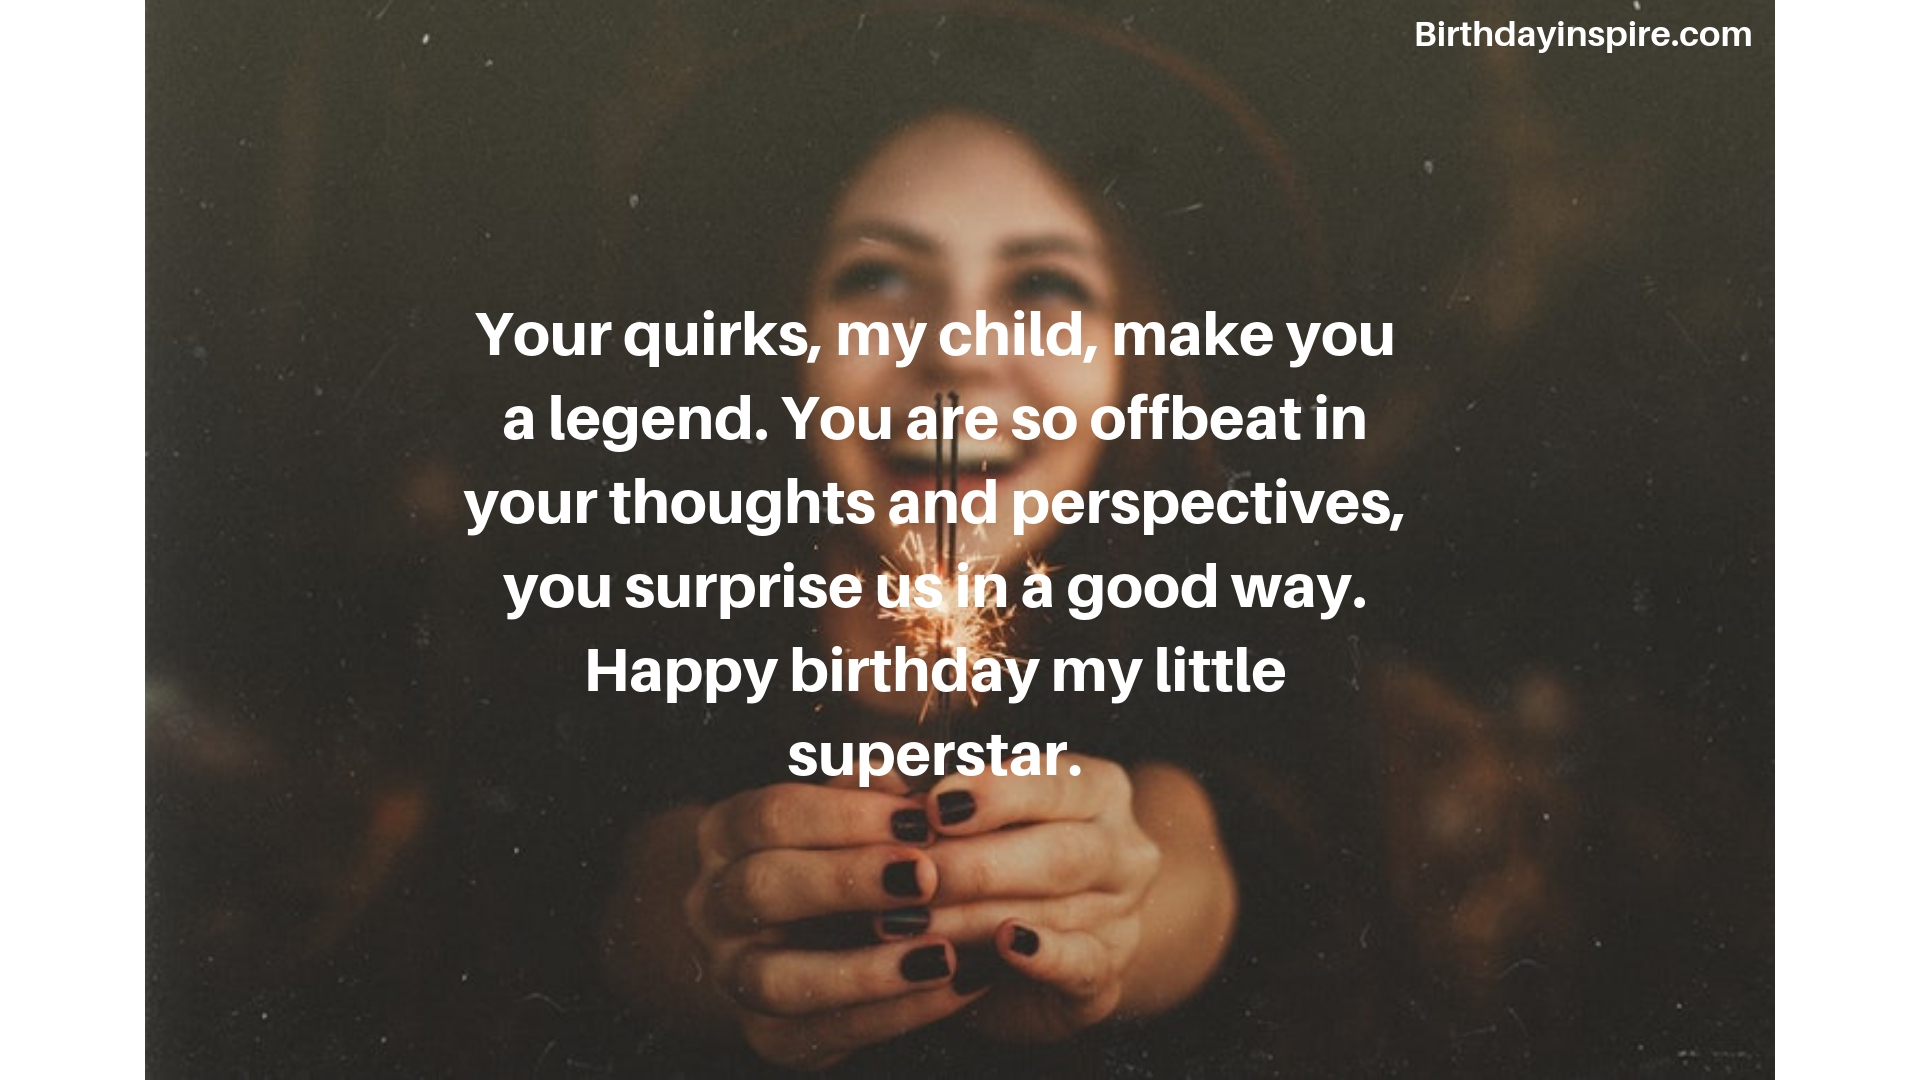 Funny birthday wishes for daughter